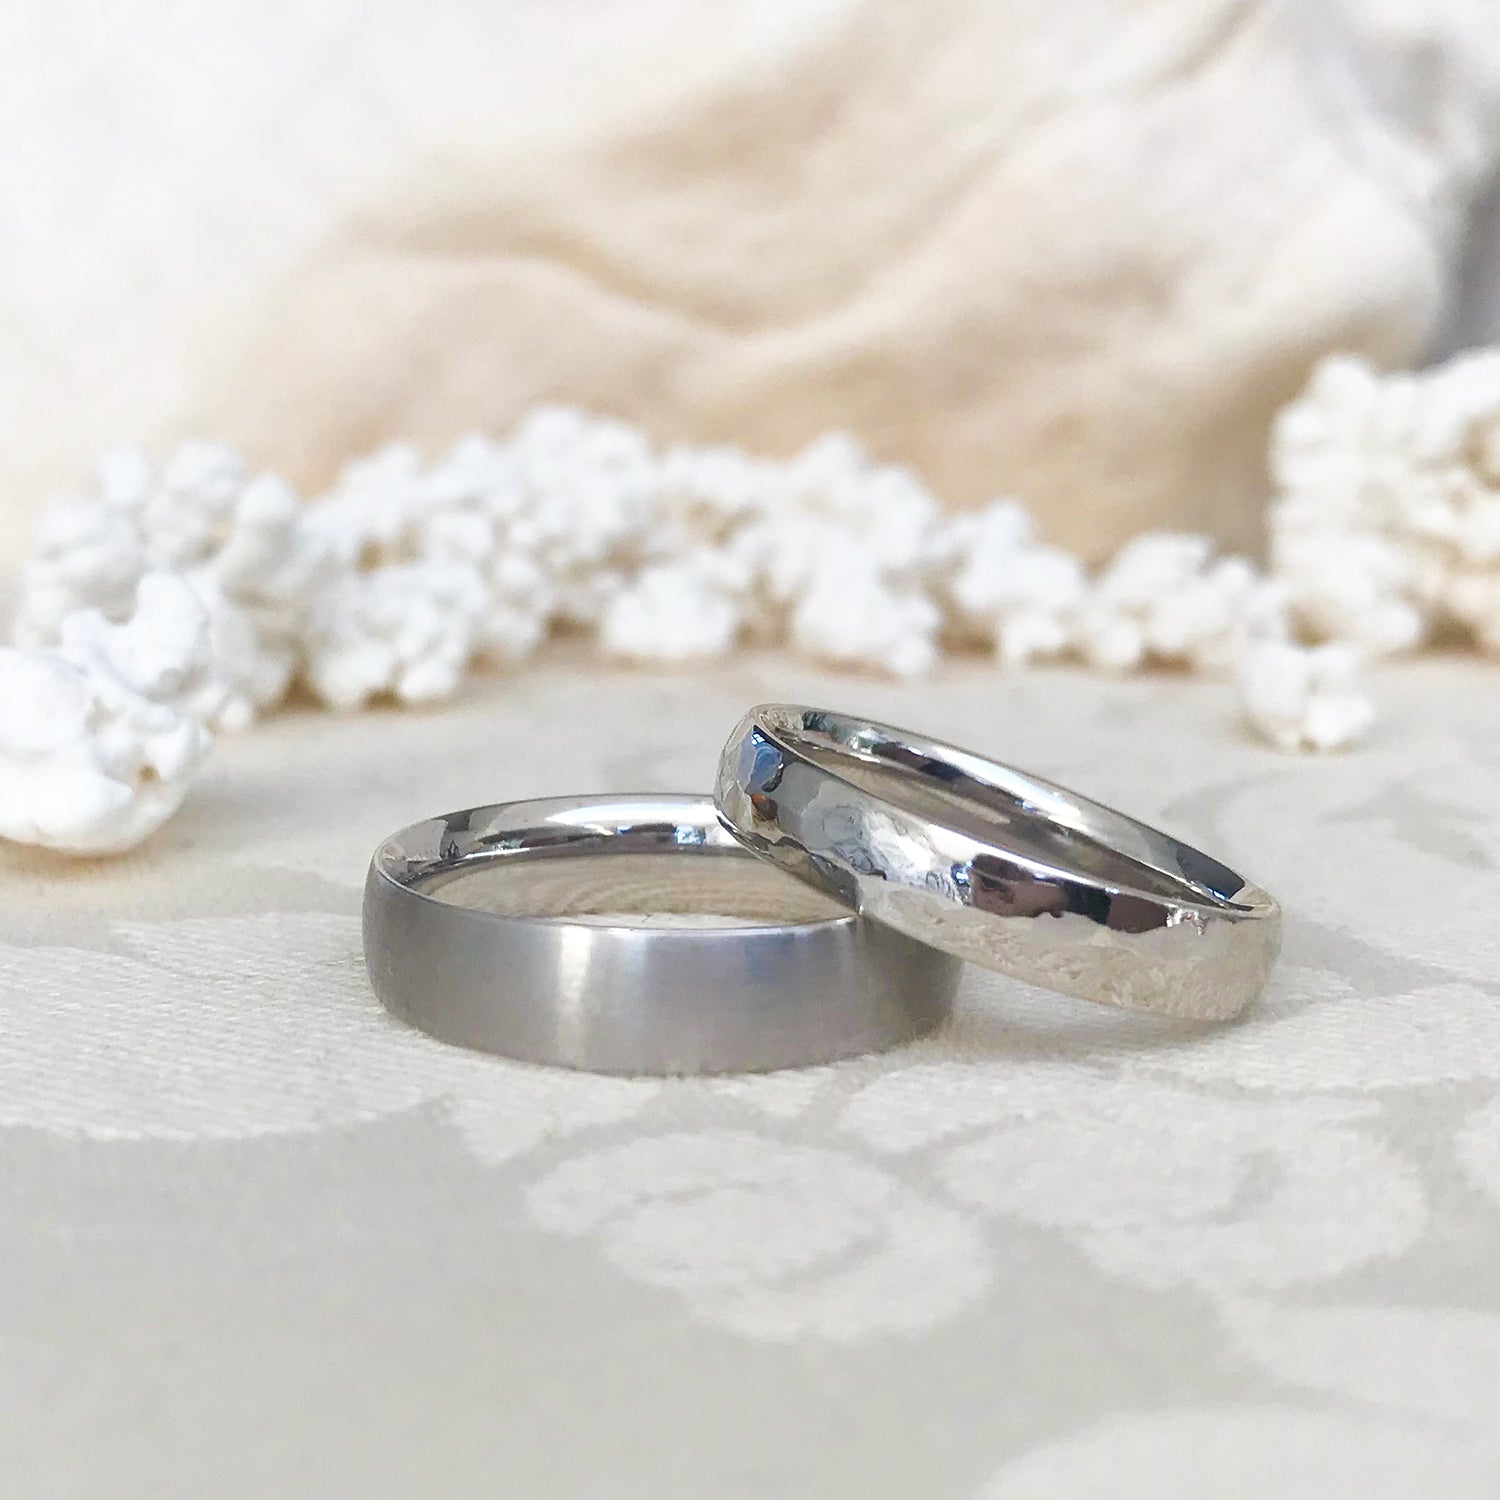 Classic men's wedding rings with polished and matte finishes